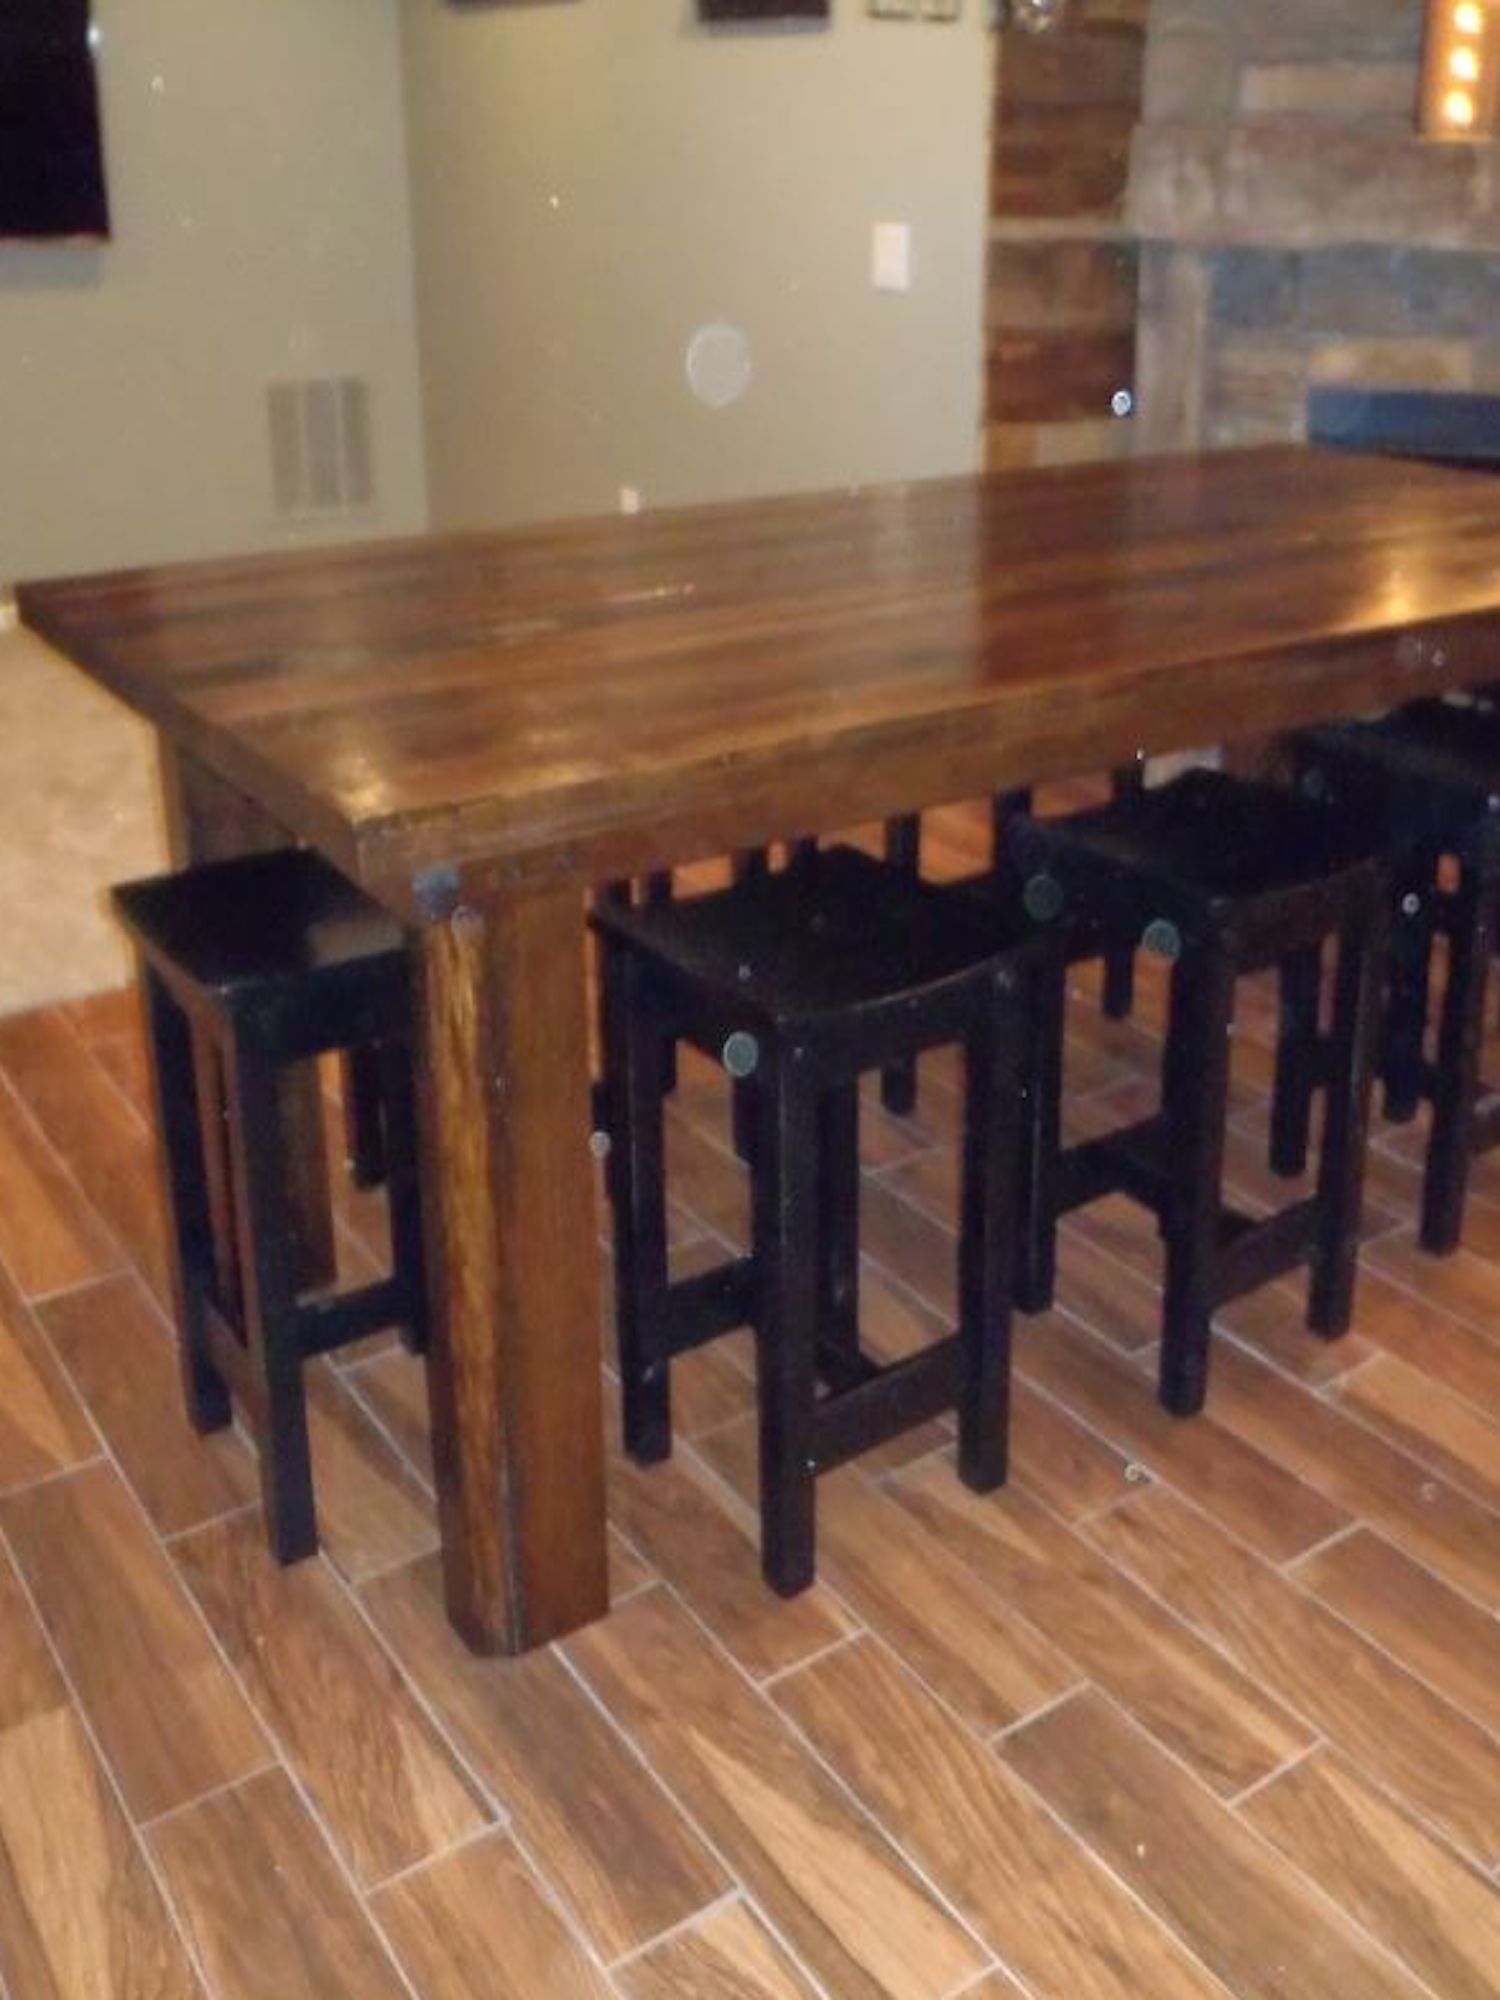 A handcrafted barnwood table in a customer's kitchen